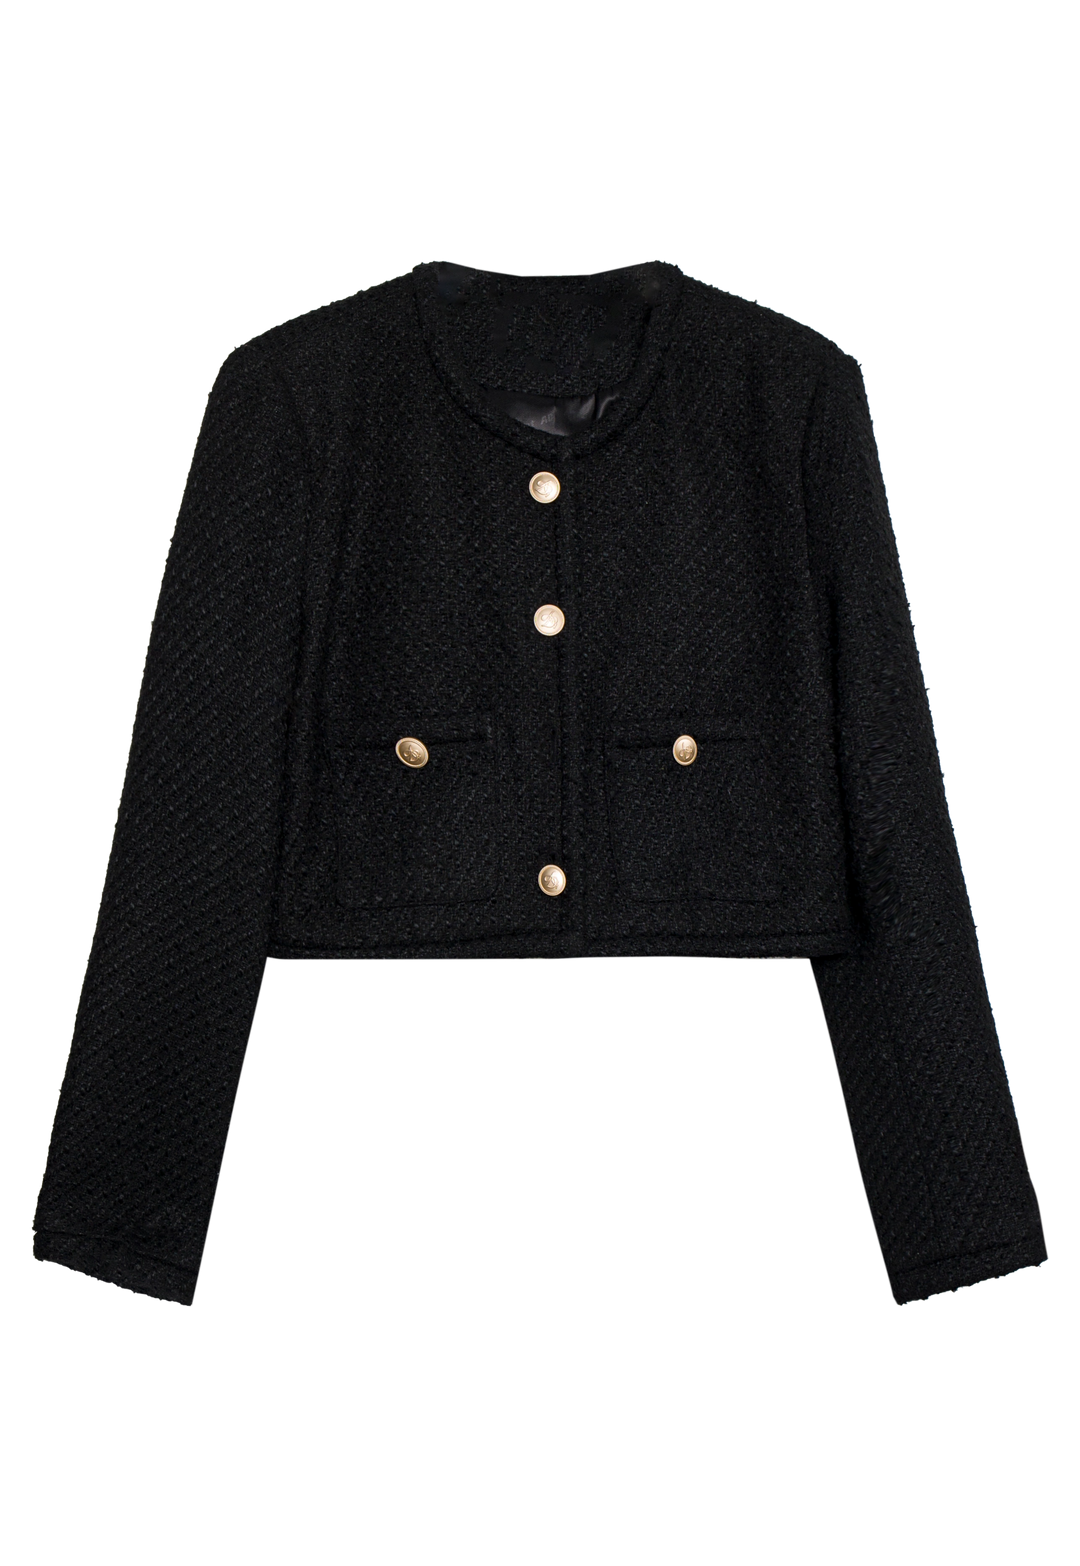 Women's Black Tweed Jacket with Round Neck and Gold Buttons